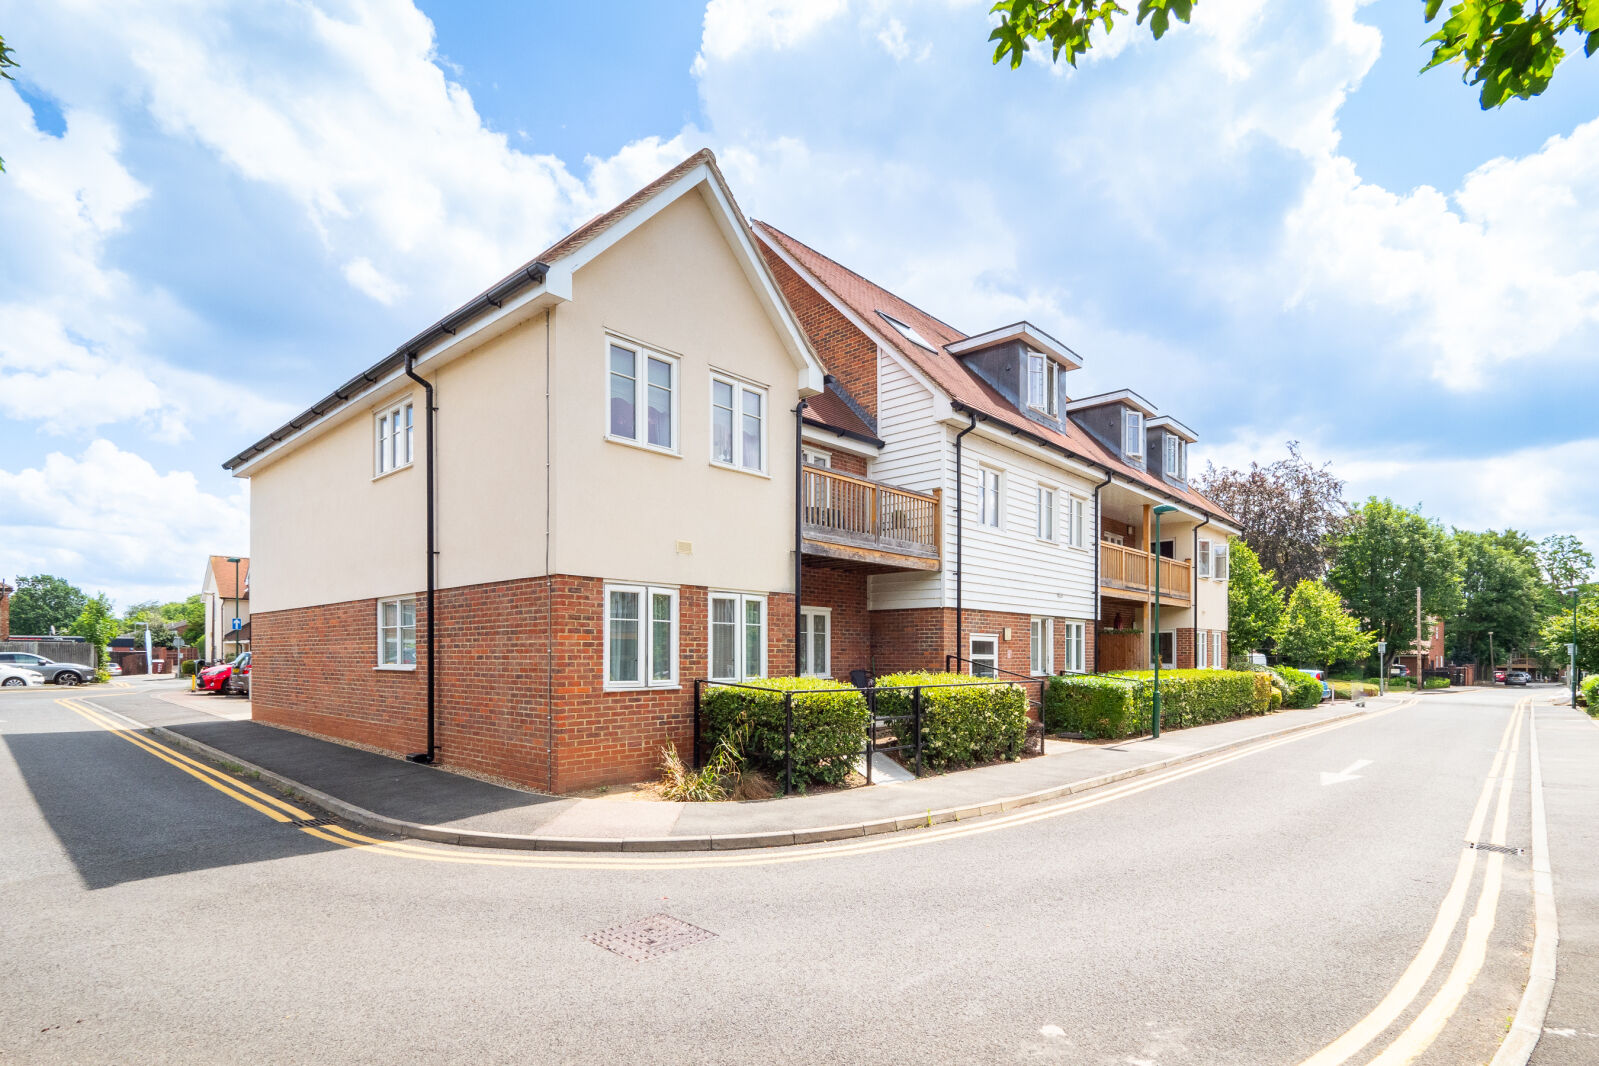 2 bedroom  flat for sale Pond Hill Gardens, Cheam Village, SM3, main image